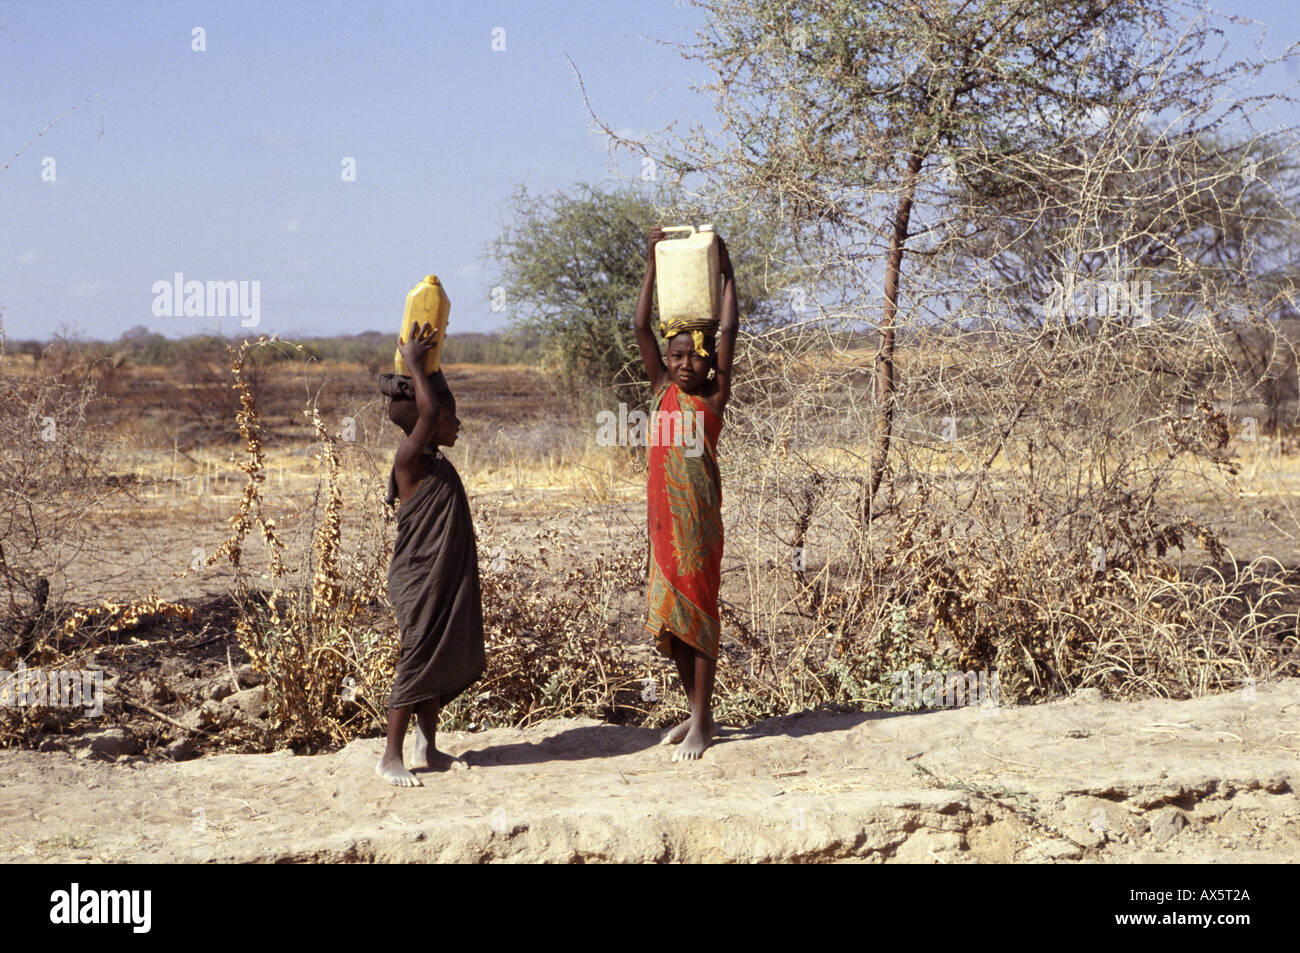 Near Dodoma, Tanzania. Young girls carrying water on their heads in dry arid savannah grassland. Stock Photo